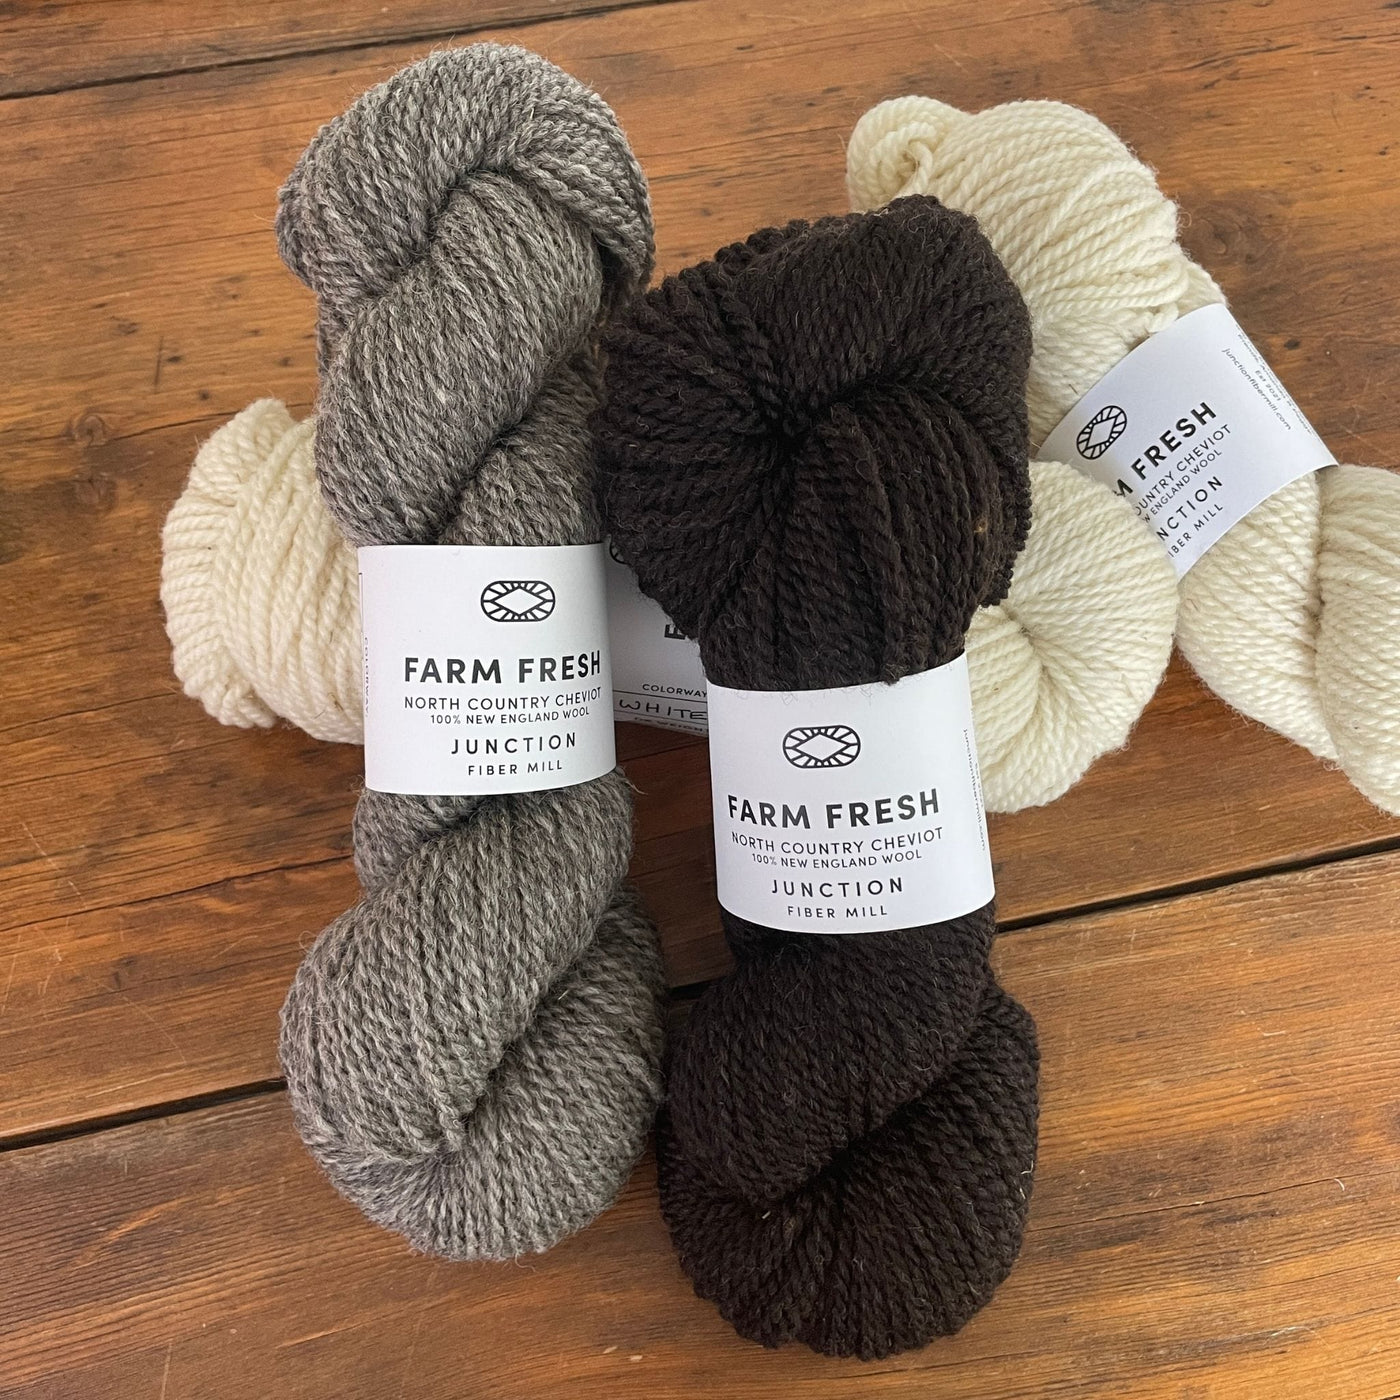 Four skeins of Junction Fiber Mill Farm Fresh, a DK weight yarn, in three natural colorways, on a wooden table